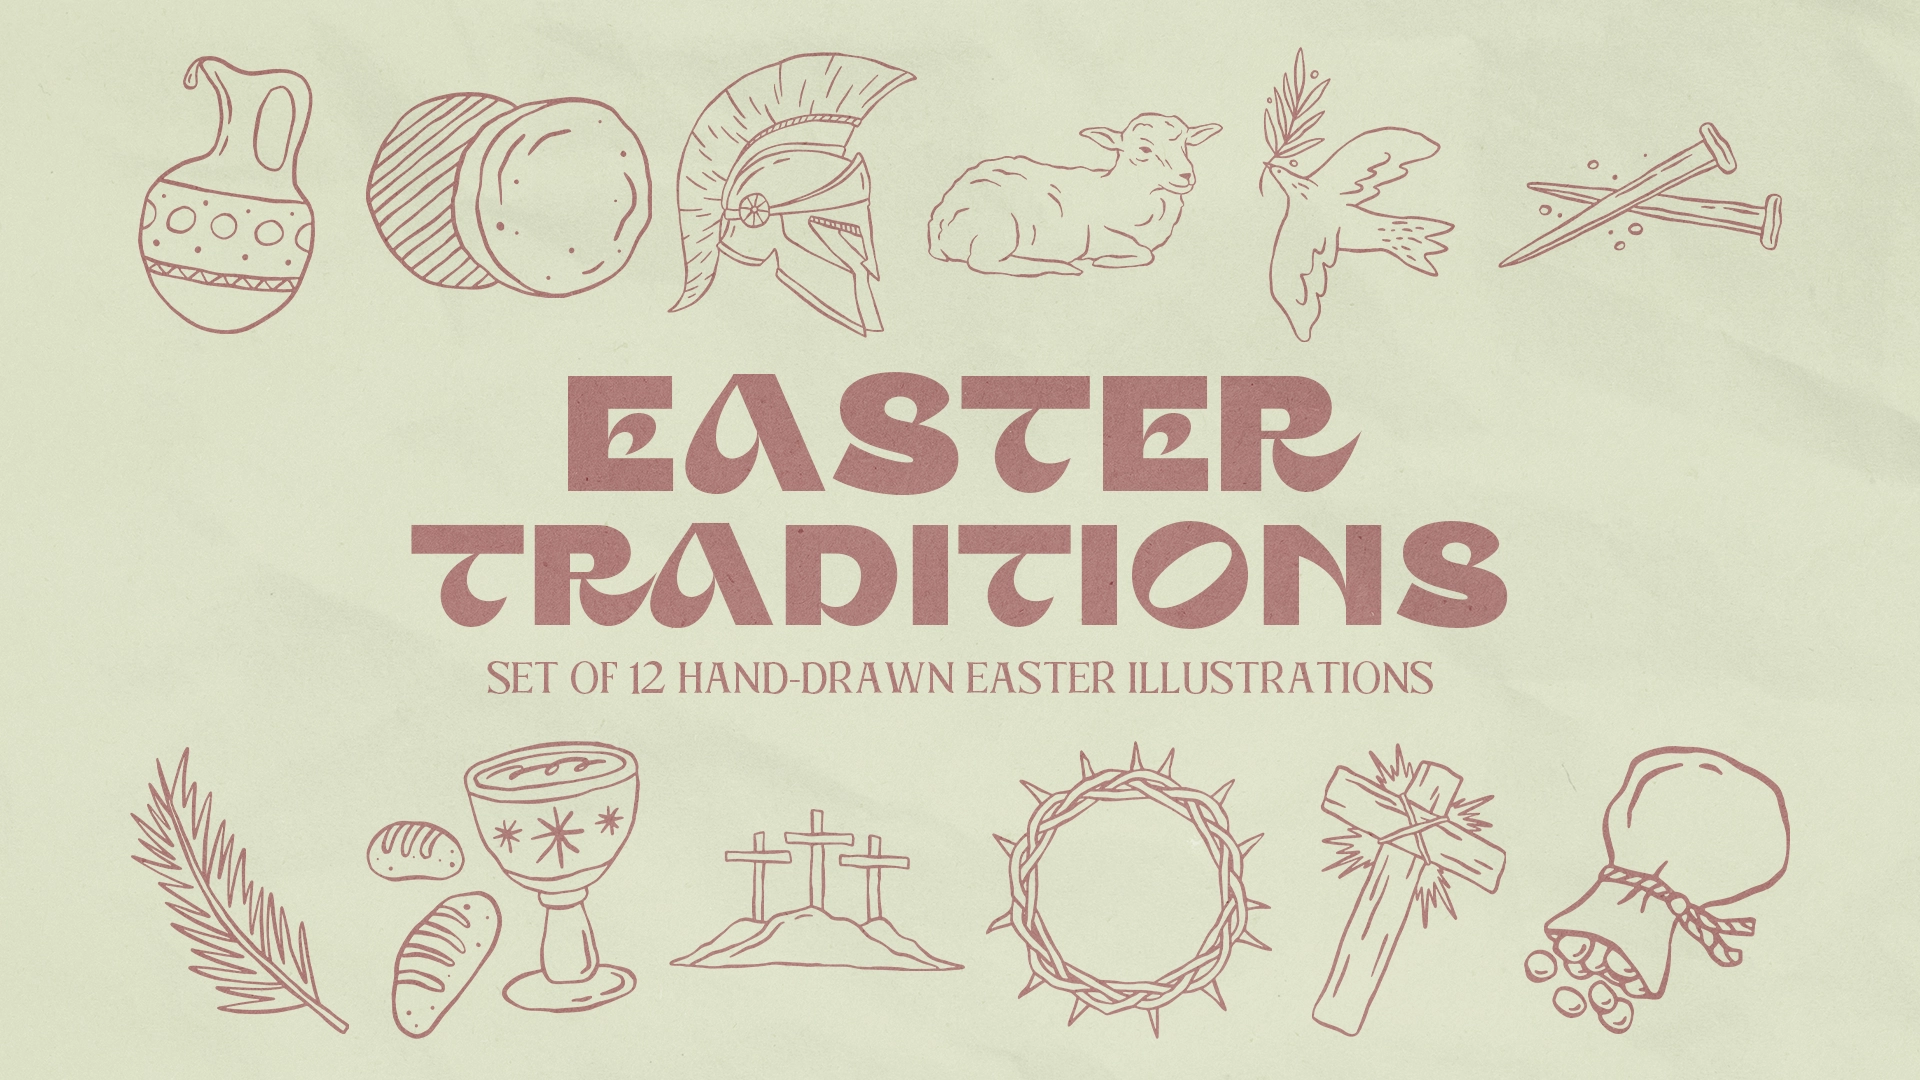 Infuse Your Church Media With The Warmth Of Tradition Using Our 'Easter Traditions' Set, Showcasing A Collection Of 12 Hand-Drawn Illustrations That Beautifully Capture The Essence Of The Holiday'S Customs And Symbols.